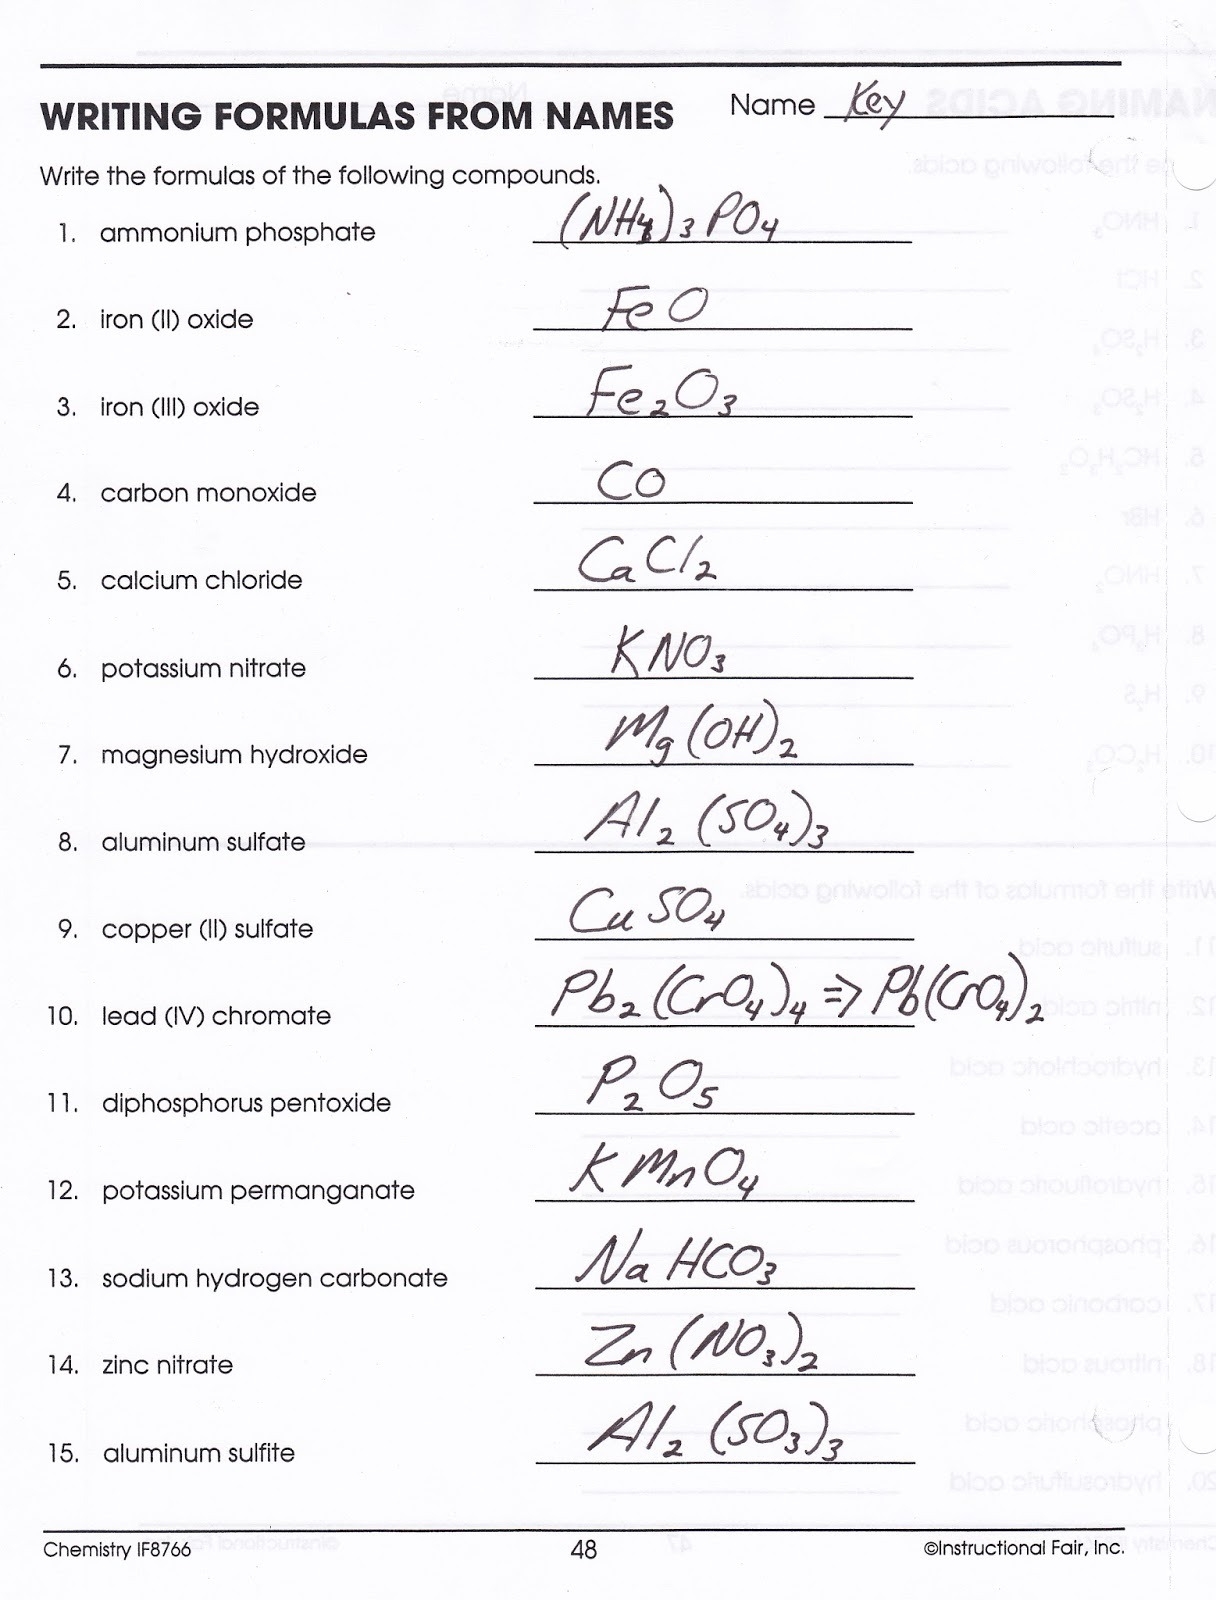 Writing Formulas And Naming Compounds Worksheet The Best